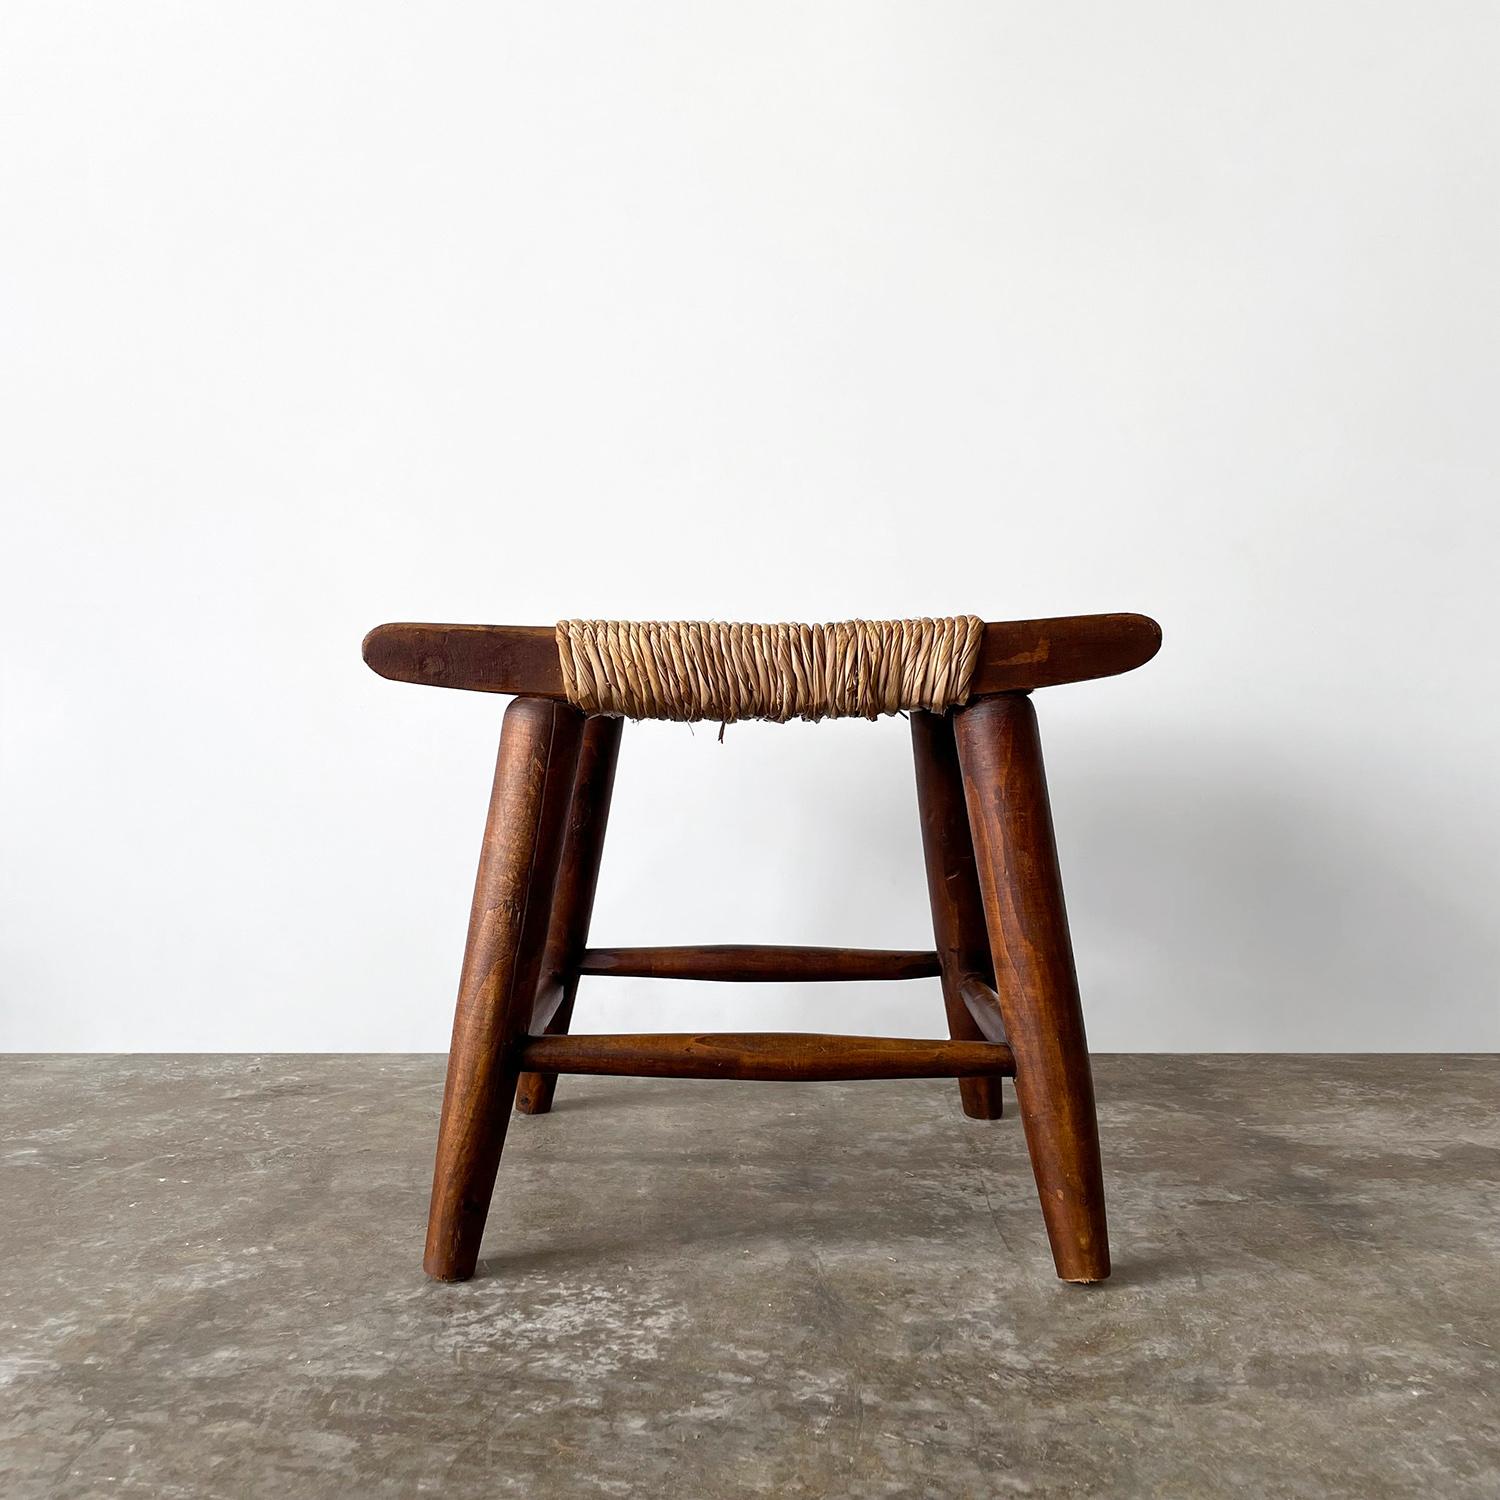 French rustic stool with rush seat
France, early 20th century
Handcrafted piece constructed of a sculpted wooden frame and woven rush seat
Wooden frame shows signs of wear and minor loss around the edges
Please reference photos
Patina from age and